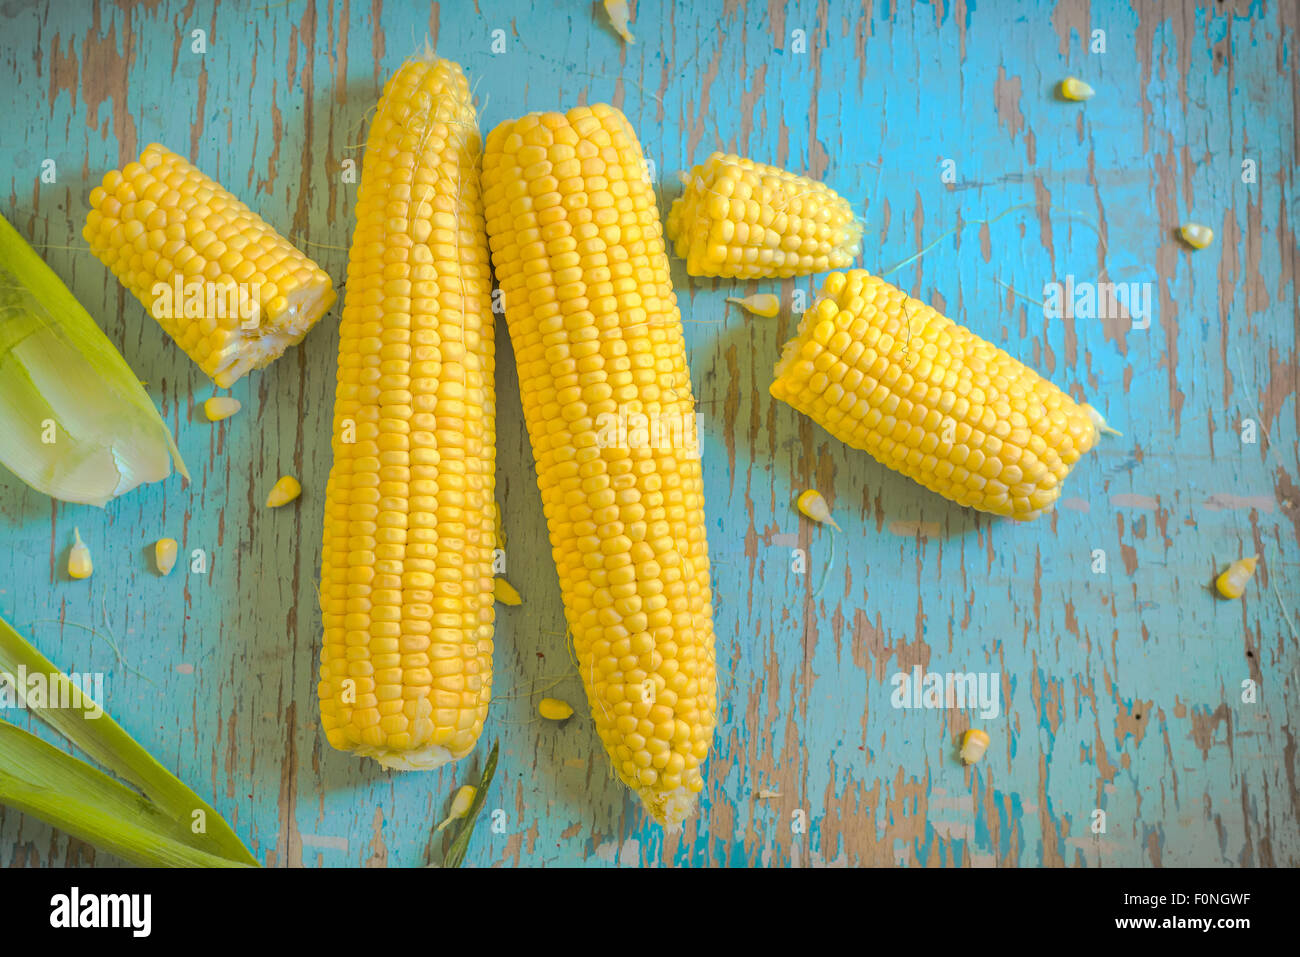 Freshly picked ear of corn, sweet maize cob with husk on rustic blue wood background, top view Stock Photo